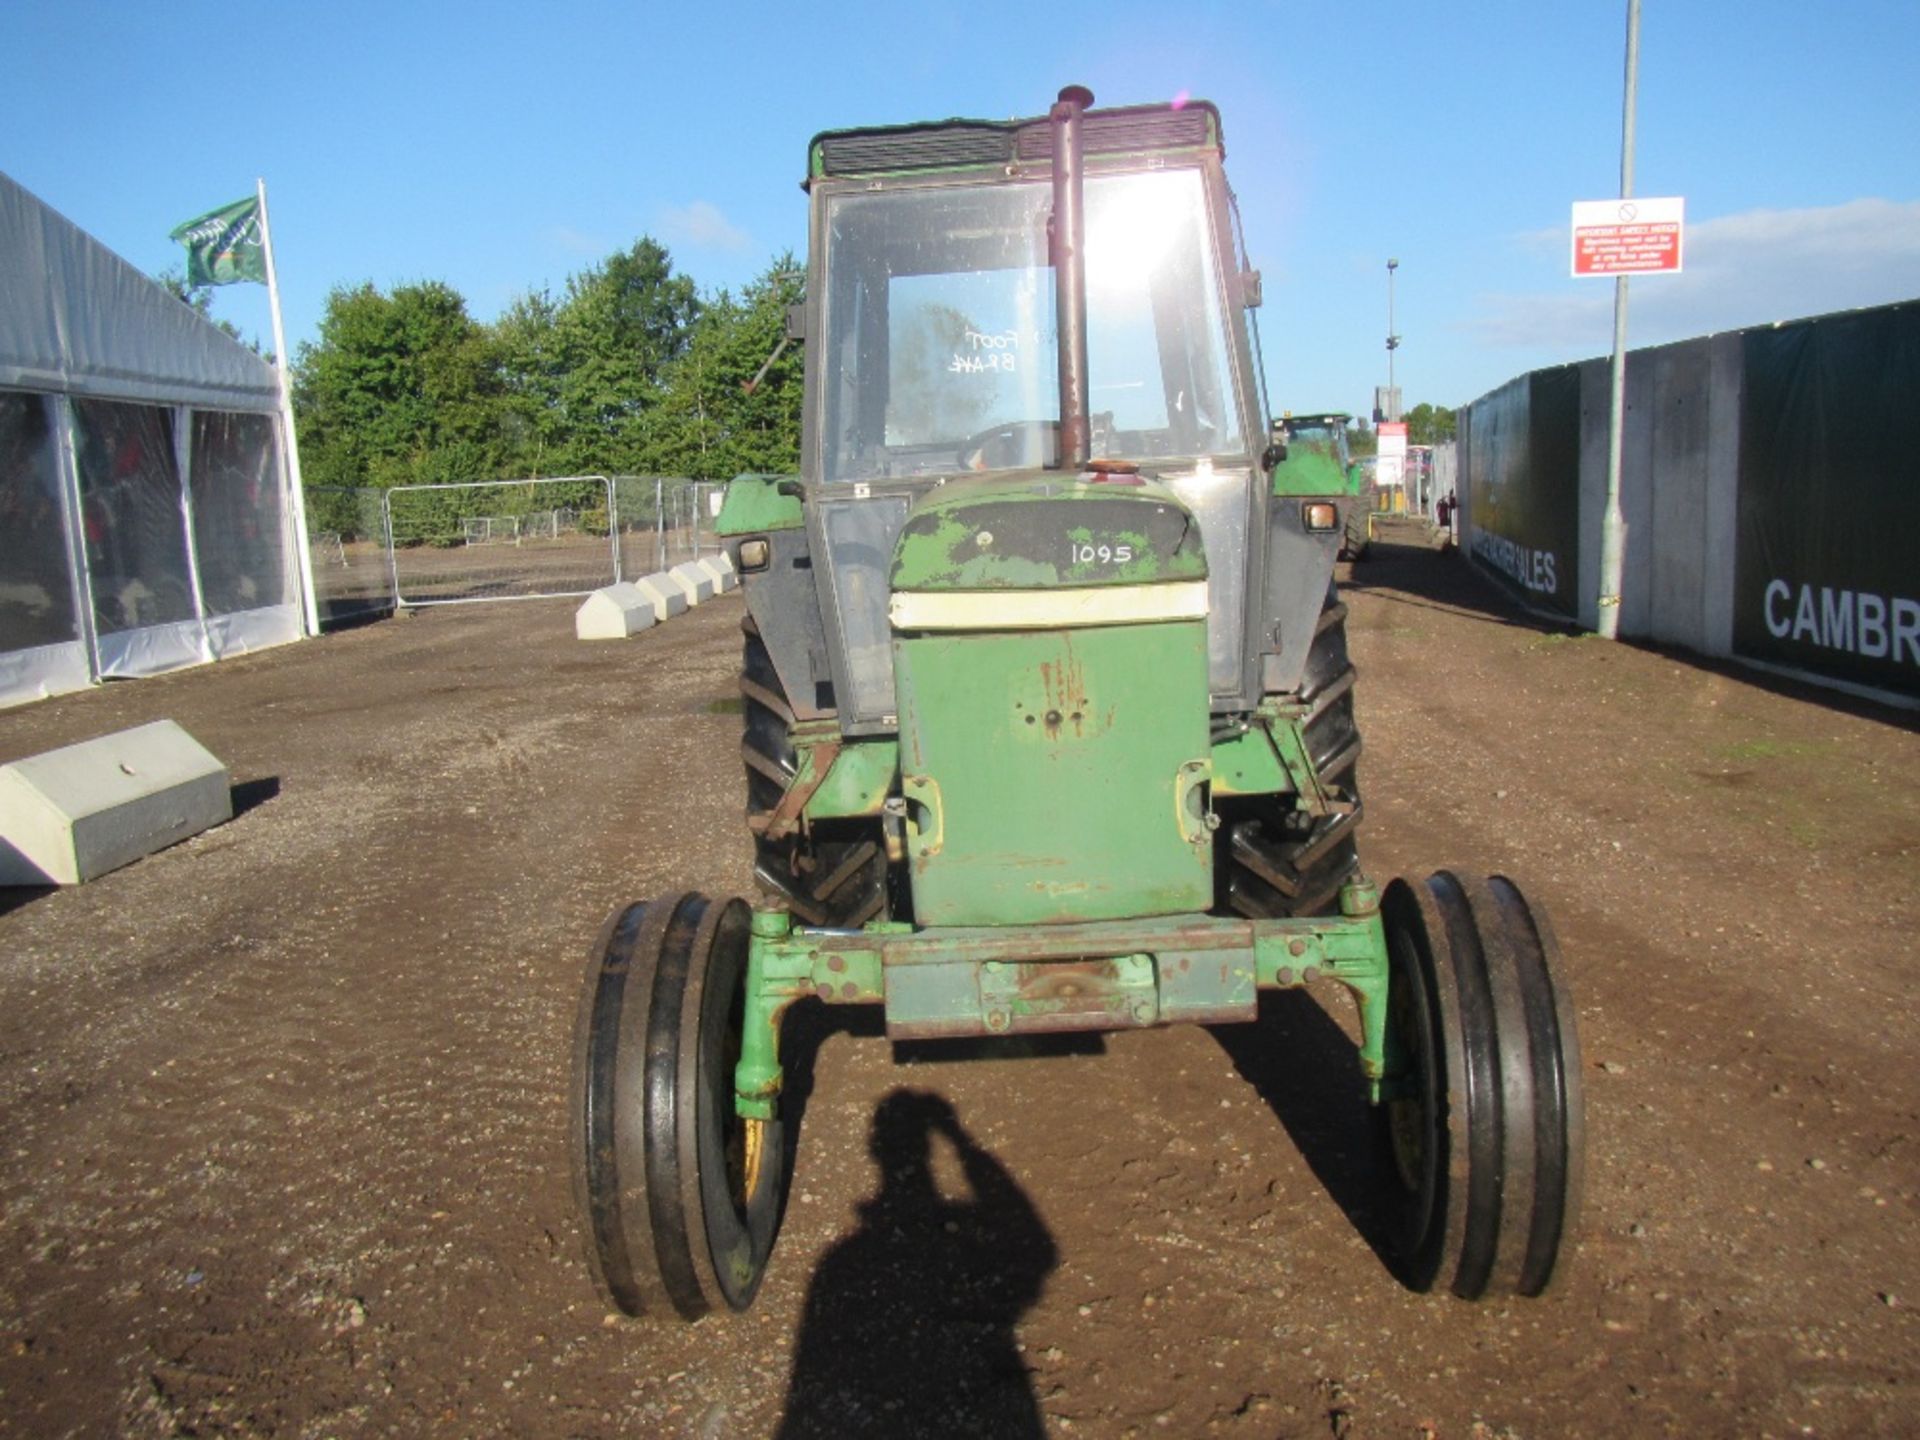 John Deere 3040 2wd Tractor with OPU Cab Reg. No. TFM 461V Ser No 364600 UNRESERVED LOT - Image 2 of 16